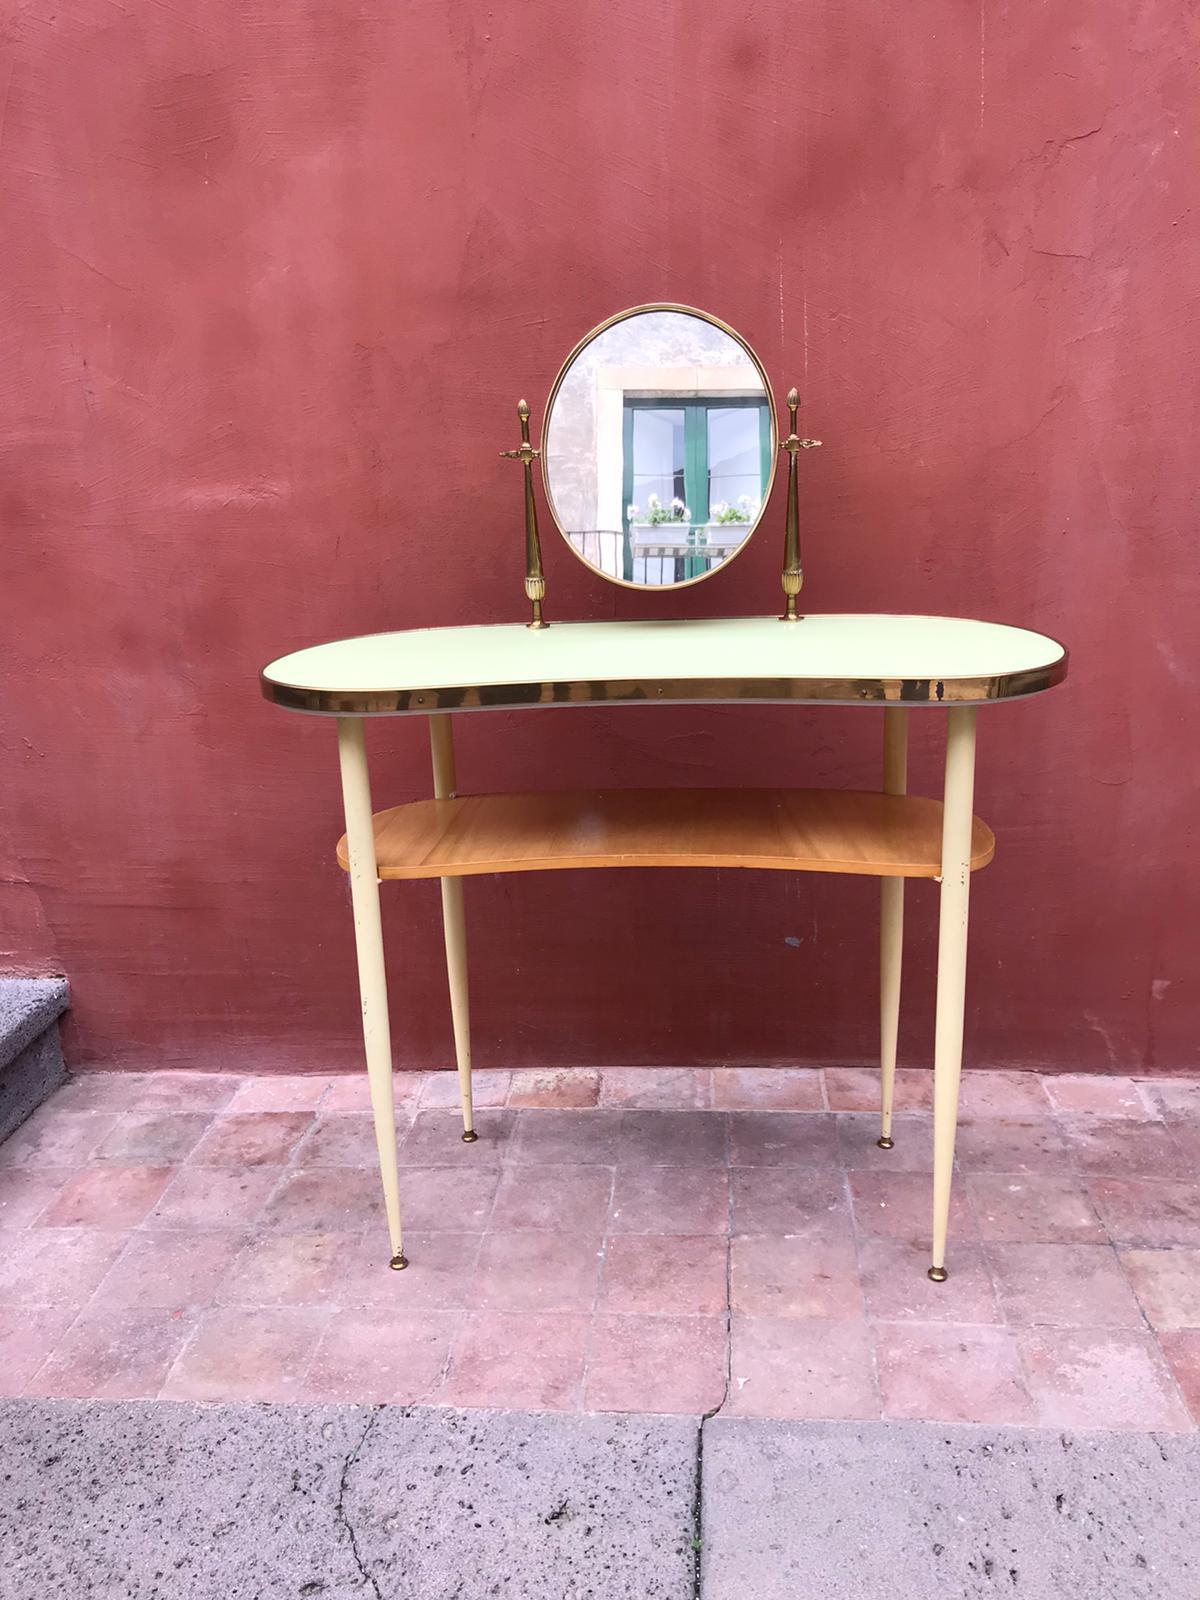 Mid-century vanity table on a four-legged lacquered metal base with a kidney-shaped glass table top and one
wooden shelf. The oval mirror is tilt able.
Good vintage condition.